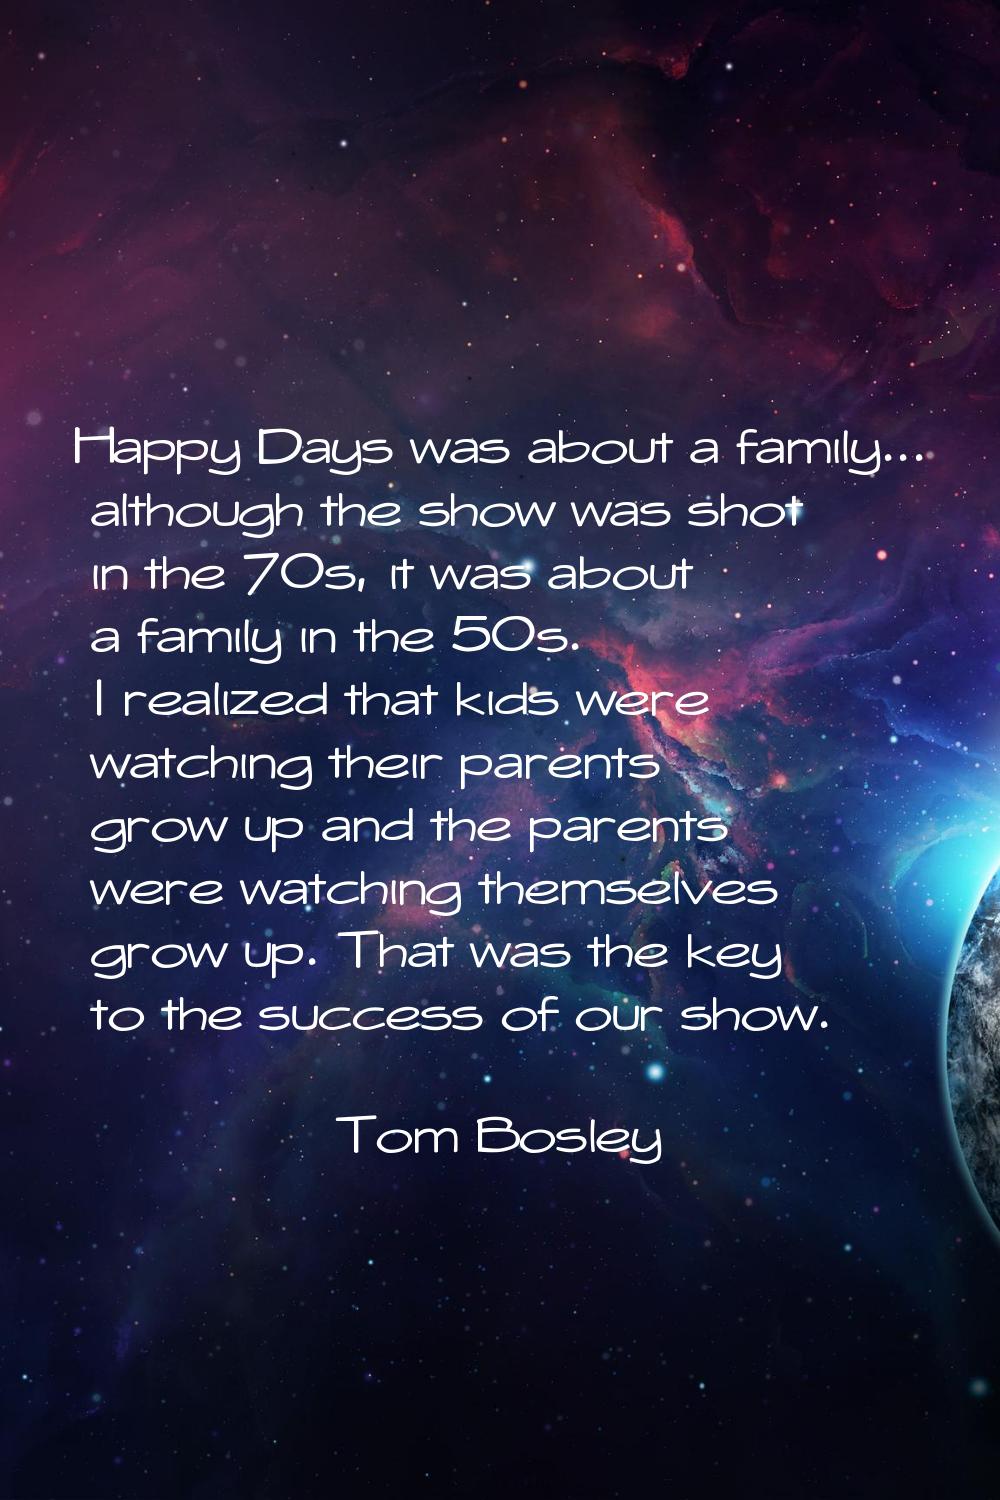 Happy Days was about a family... although the show was shot in the 70s, it was about a family in th